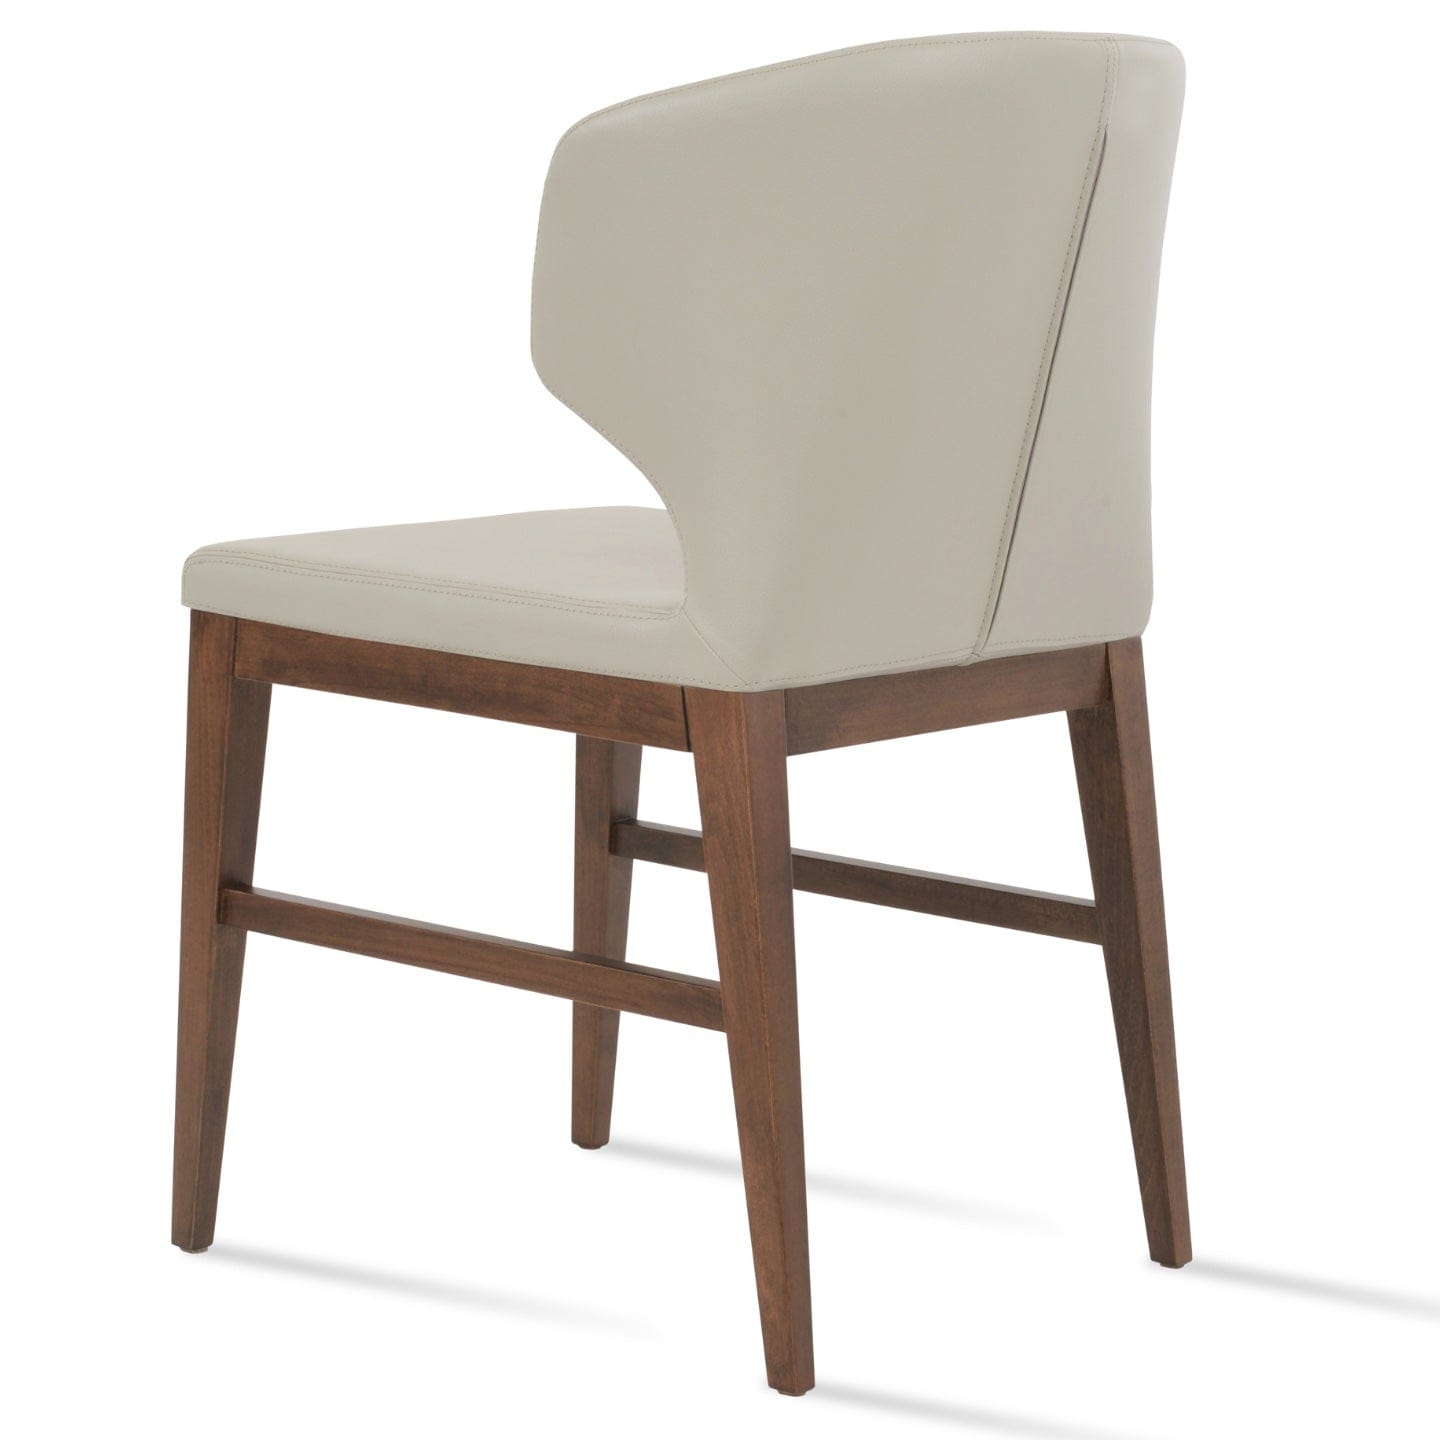 sohoConcept Kitchen & Dining Room Chairs Amed Stretcher Wood Chairs | Leather Wooden Commercial Dining Chairs